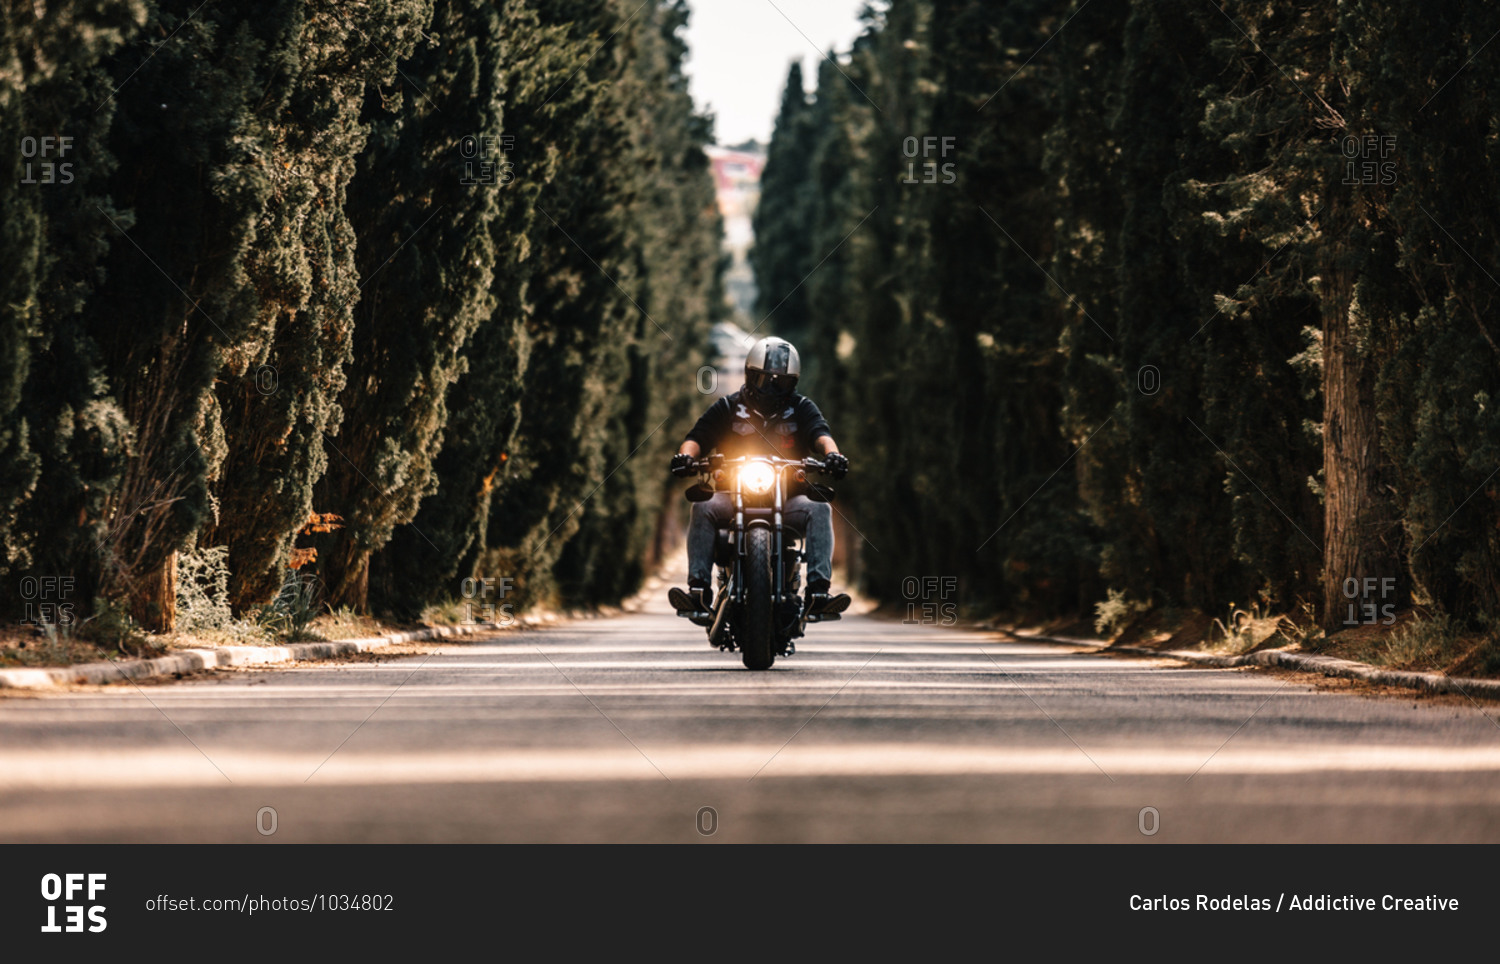 Biker in black leather jackets and helmet riding powerful motorcycle on asphalt road leading between green forest in countryside